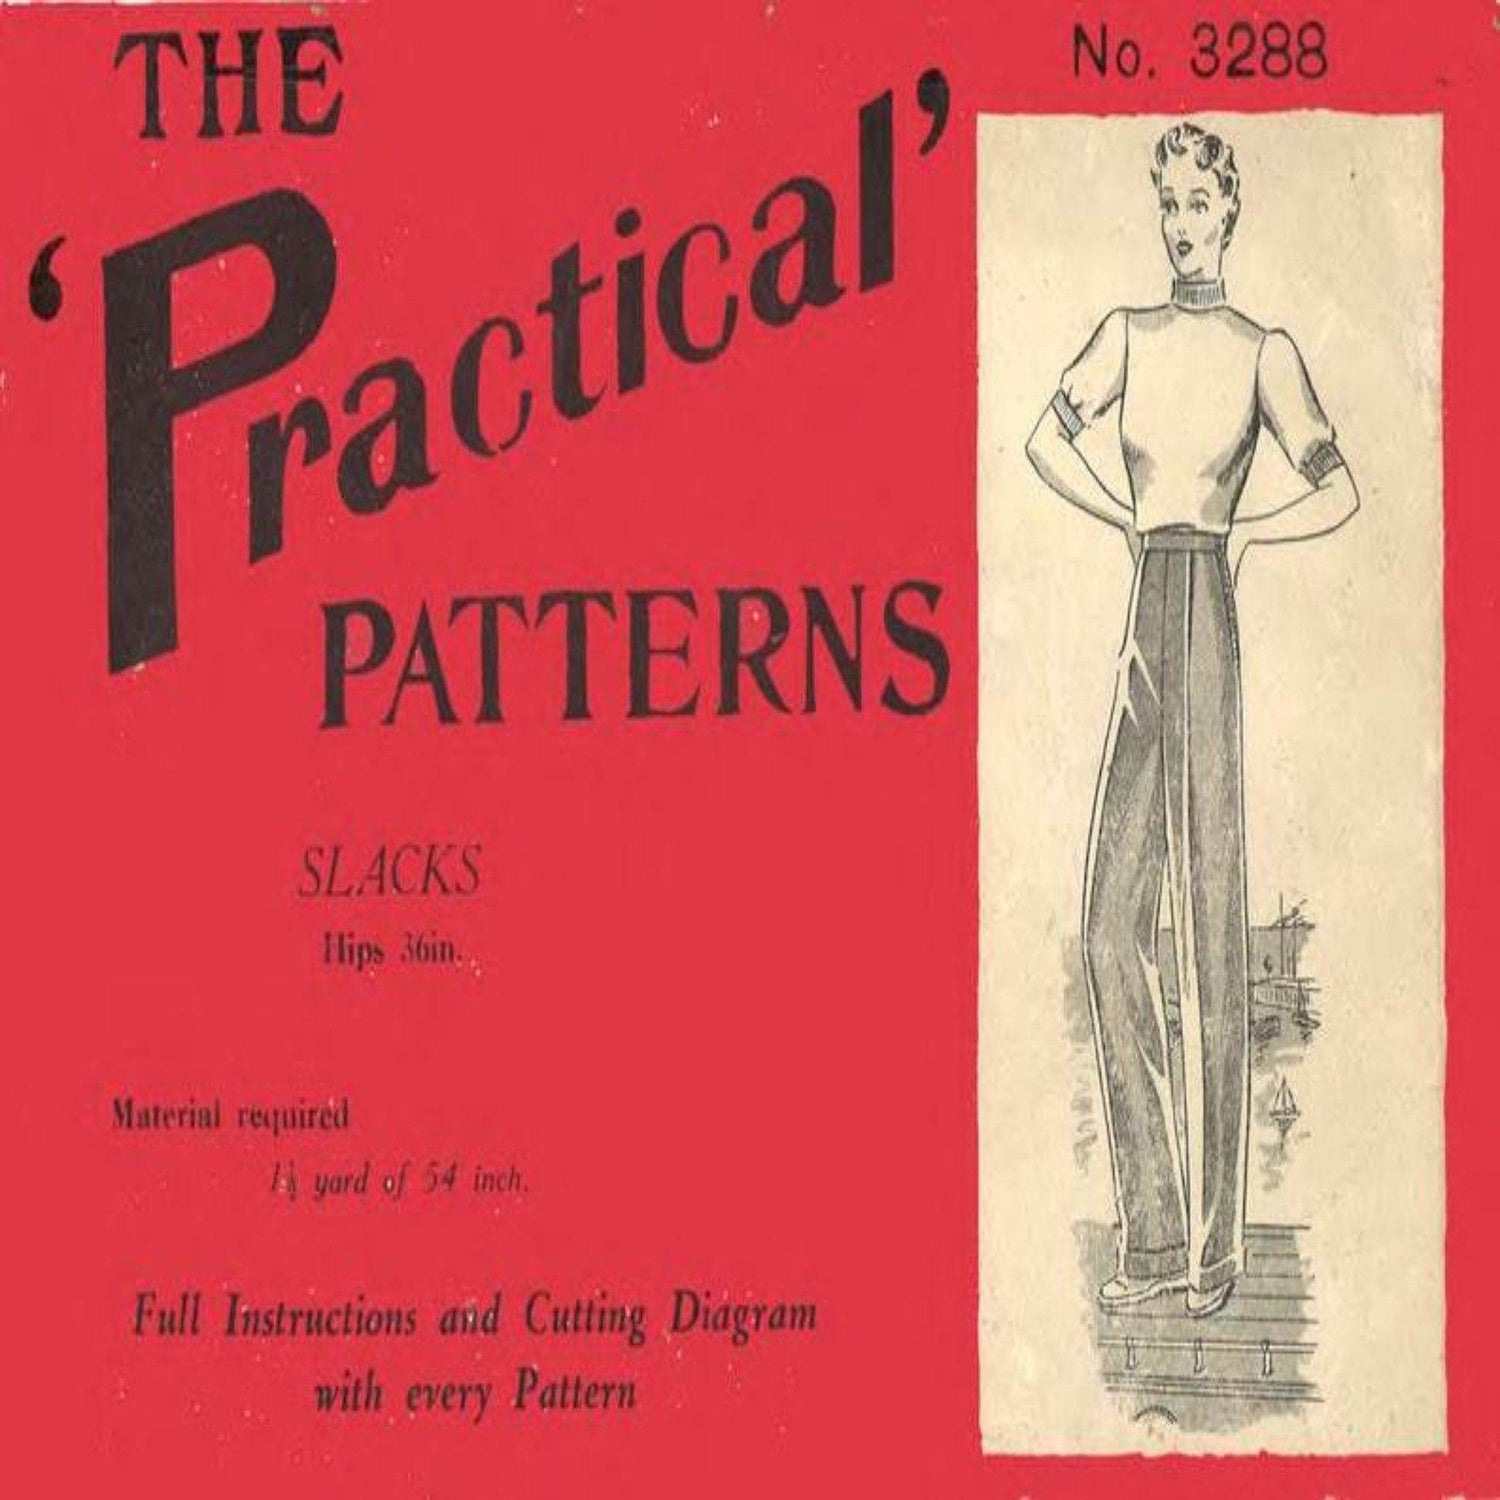 Sewing pattern cover